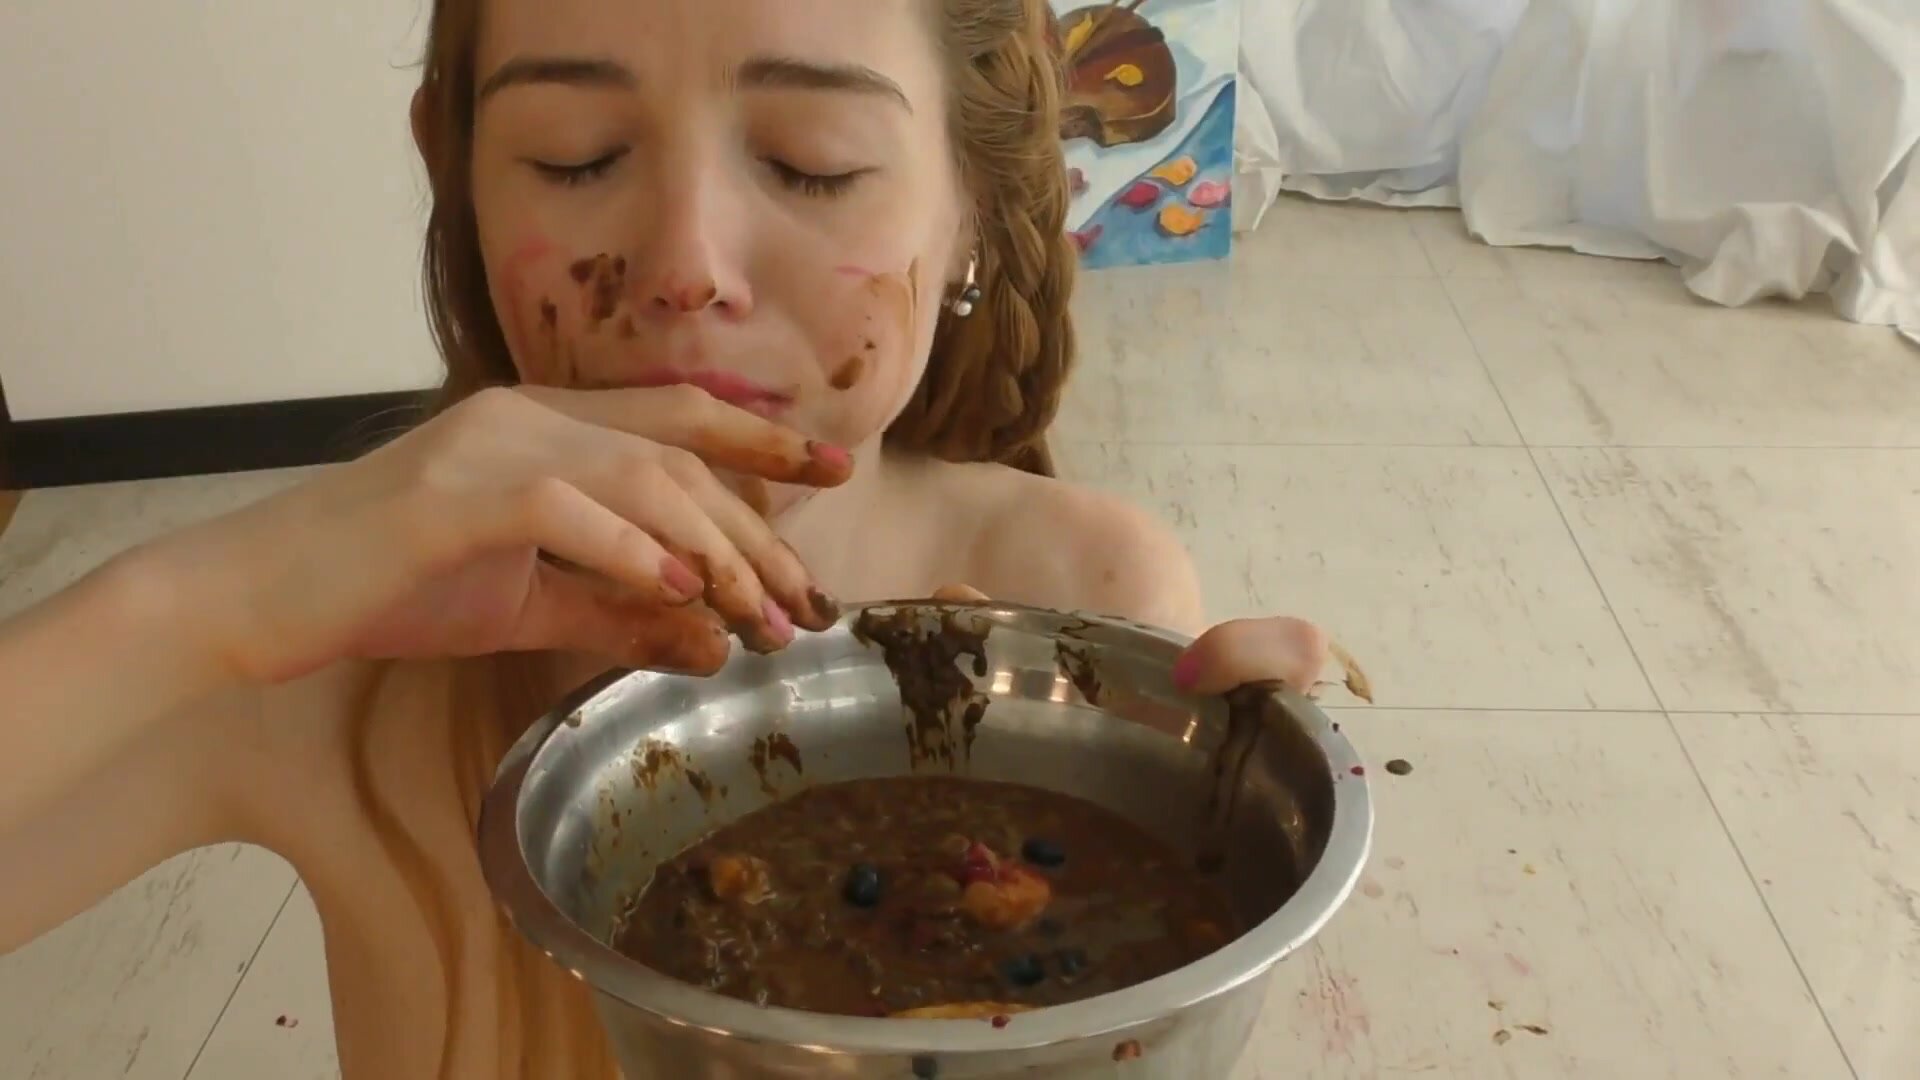 Russian slut eats shit with red fruits and banana picture